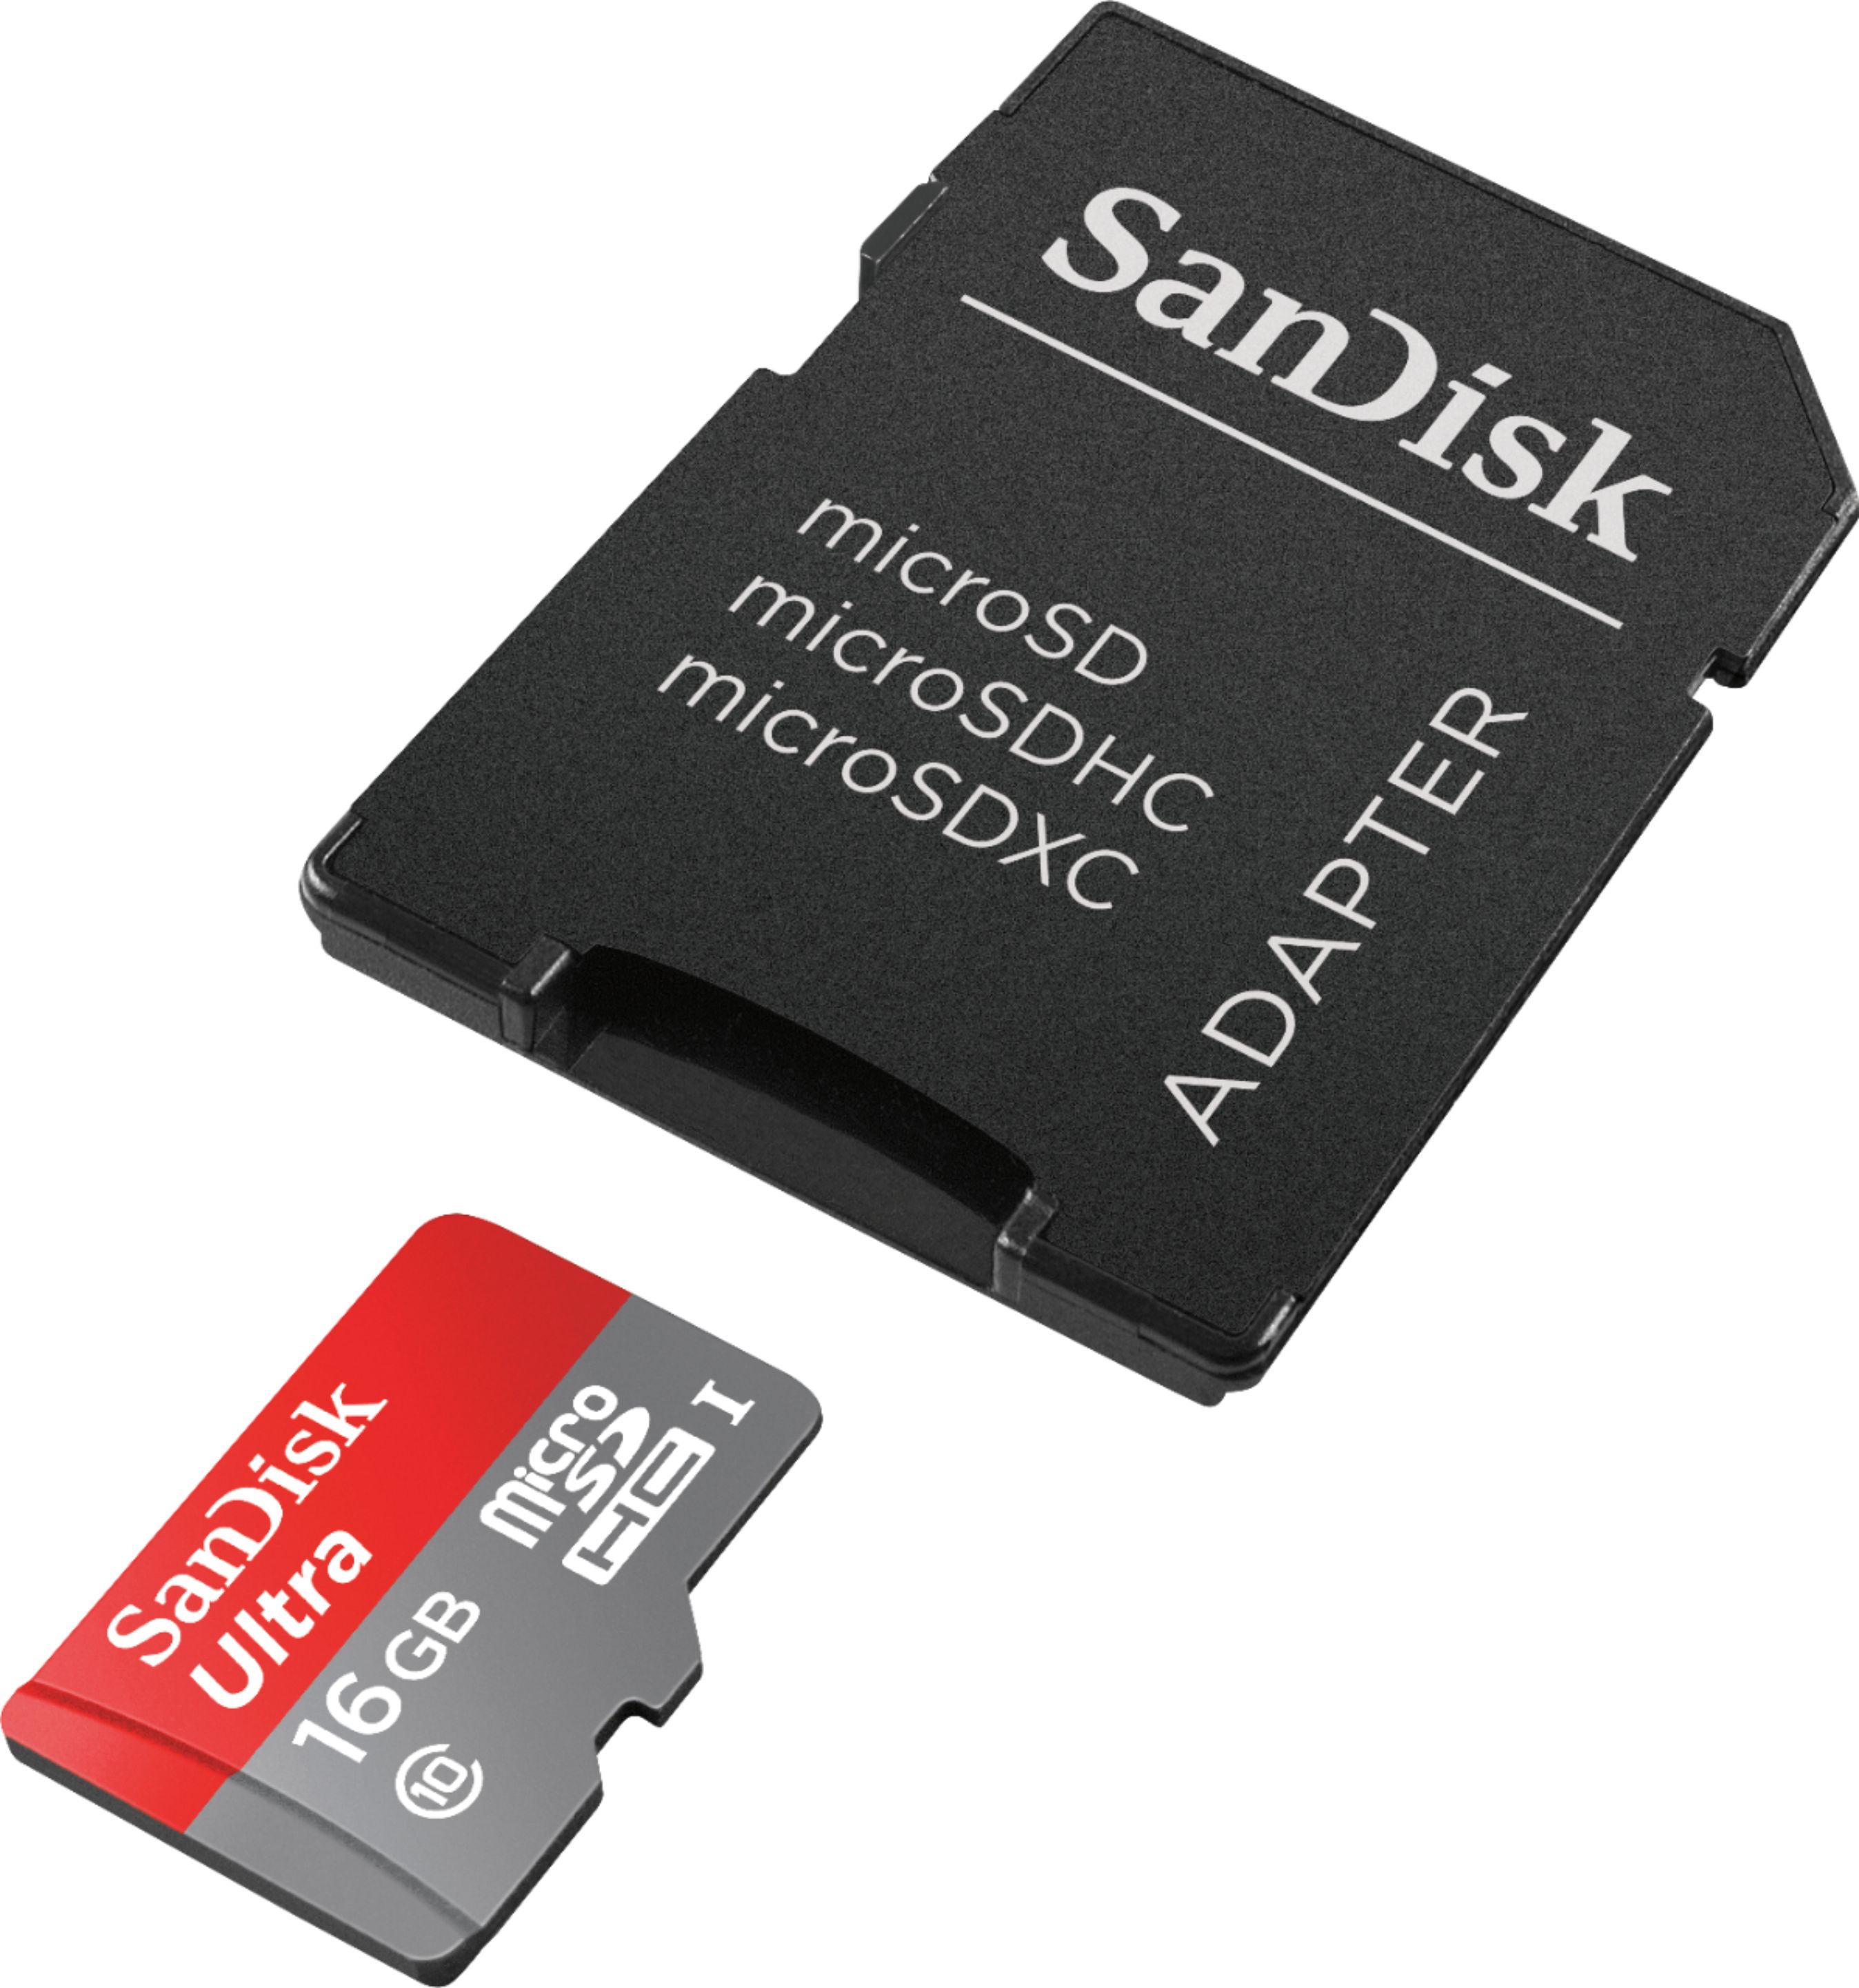 Includes Standard SD Adapter. UHS-1 Class 10 Certified 30MB/sec lossless recording Professional Ultra SanDisk 16GB MicroSDHC Card for General Mobile Fox Smartphone is custom formatted for high speed 